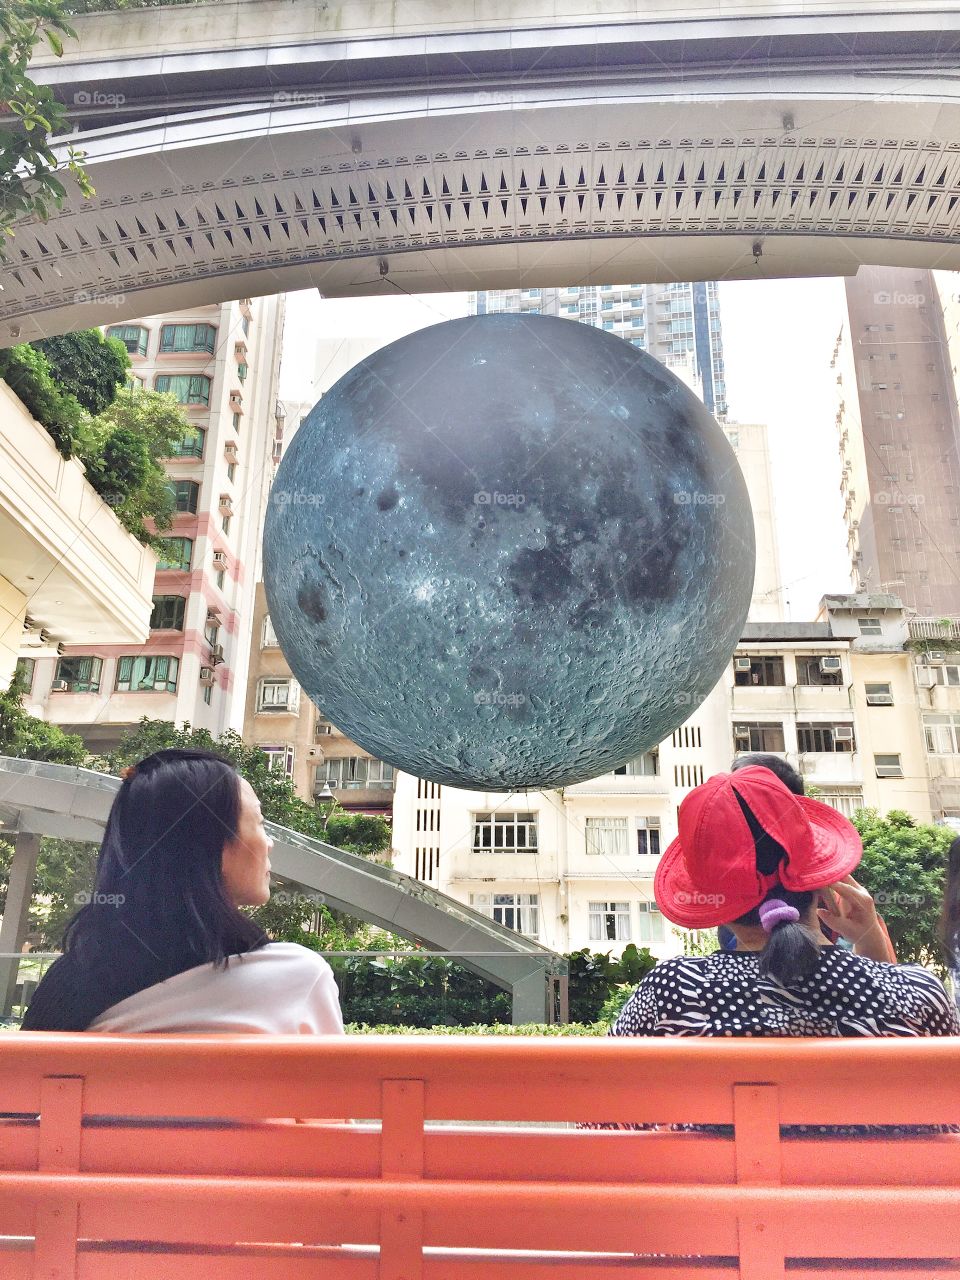 Museum of the moon, HK